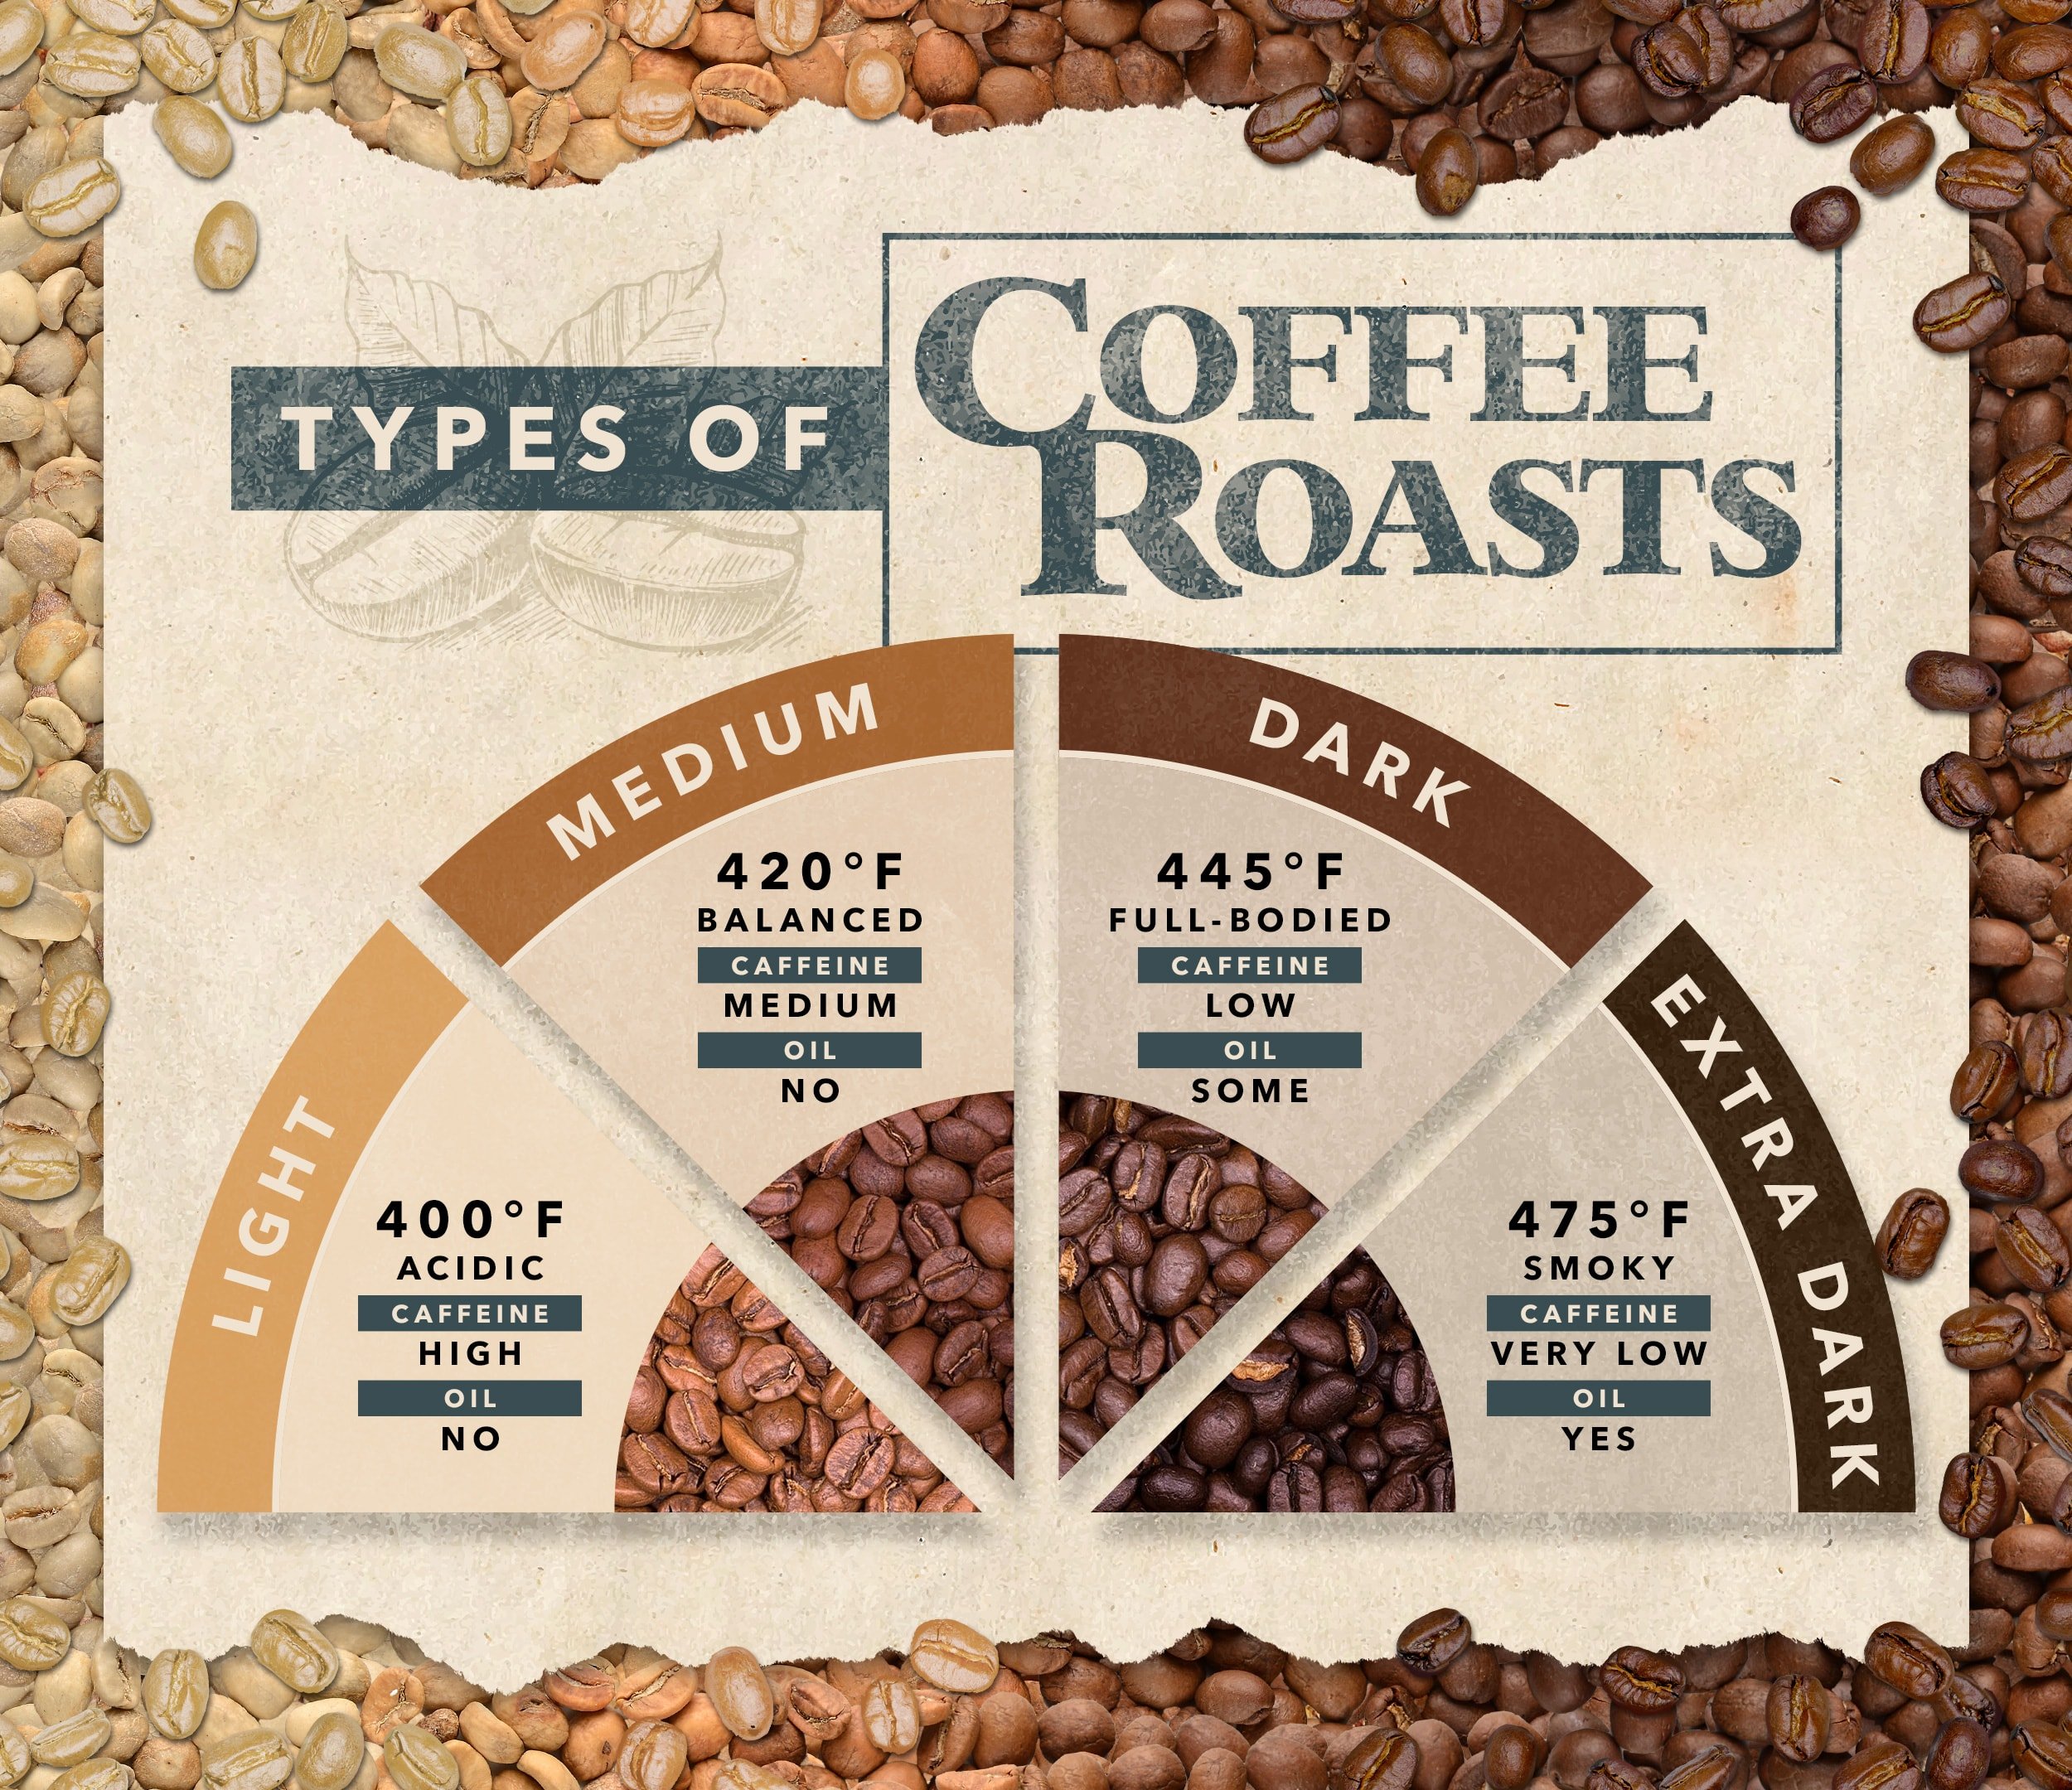 Infographic detailing different levels of coffee roasts.